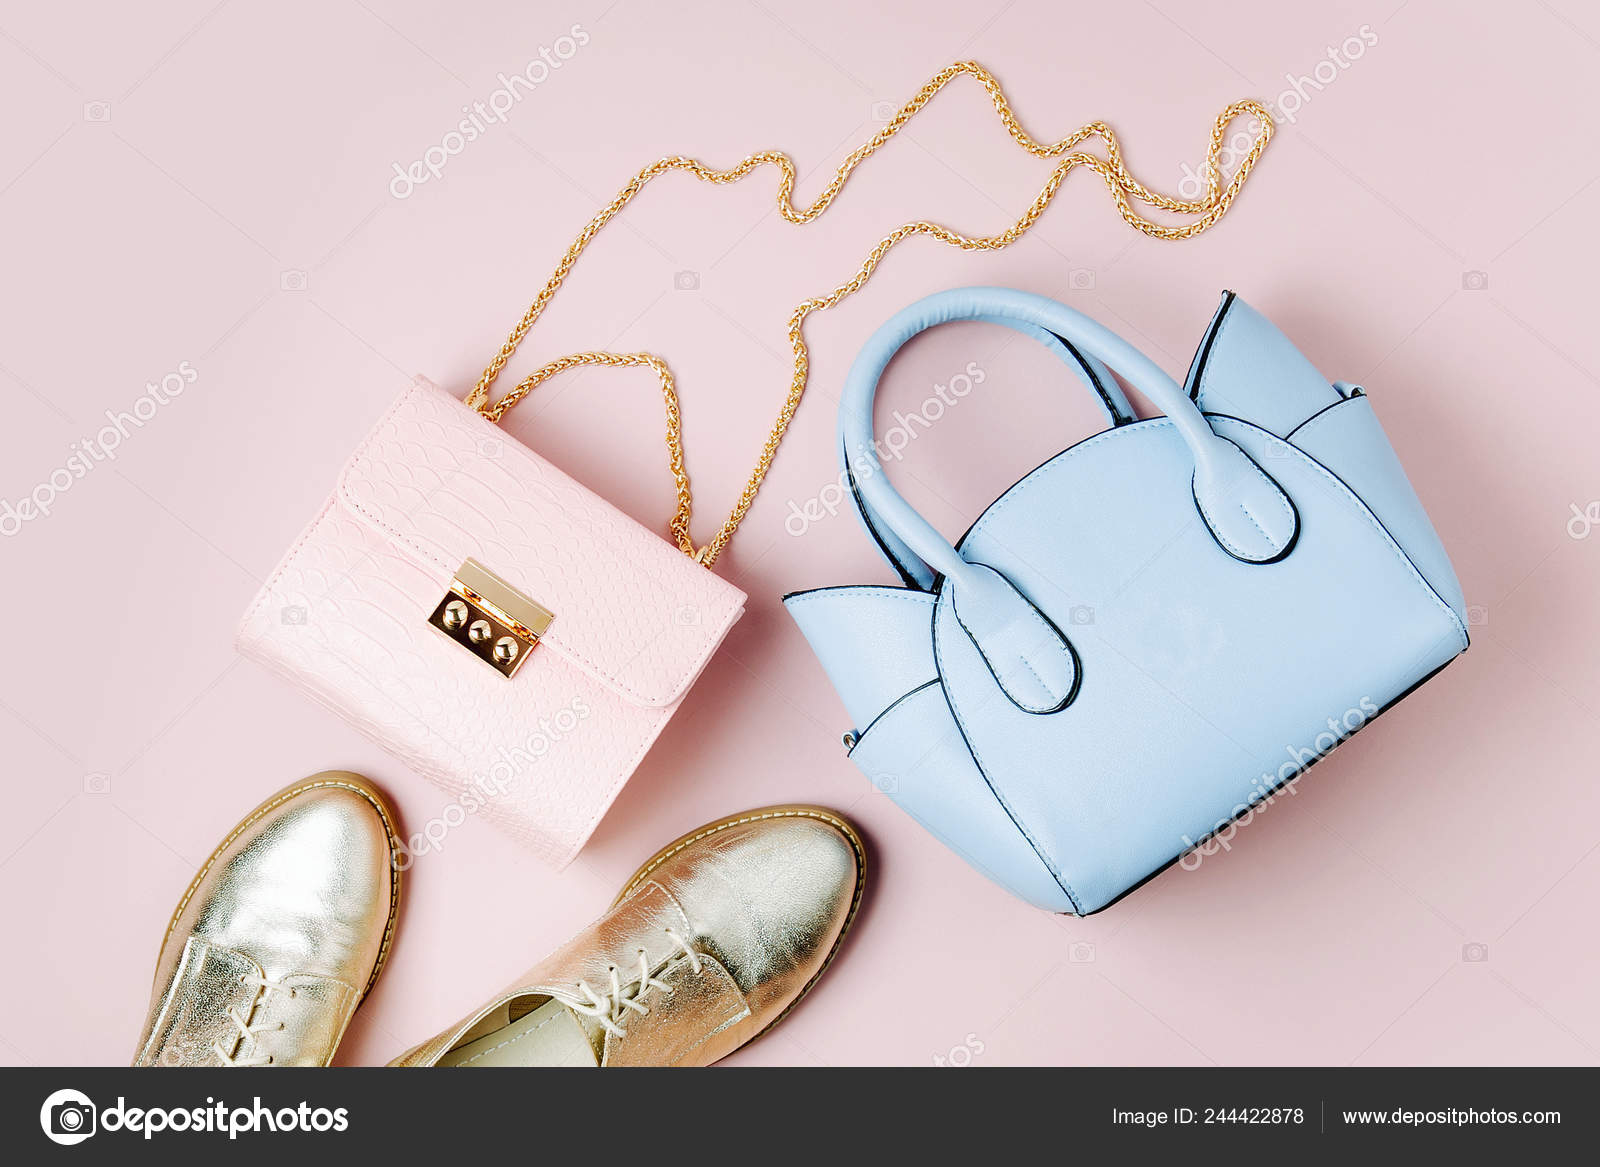 blush pink bag and shoes